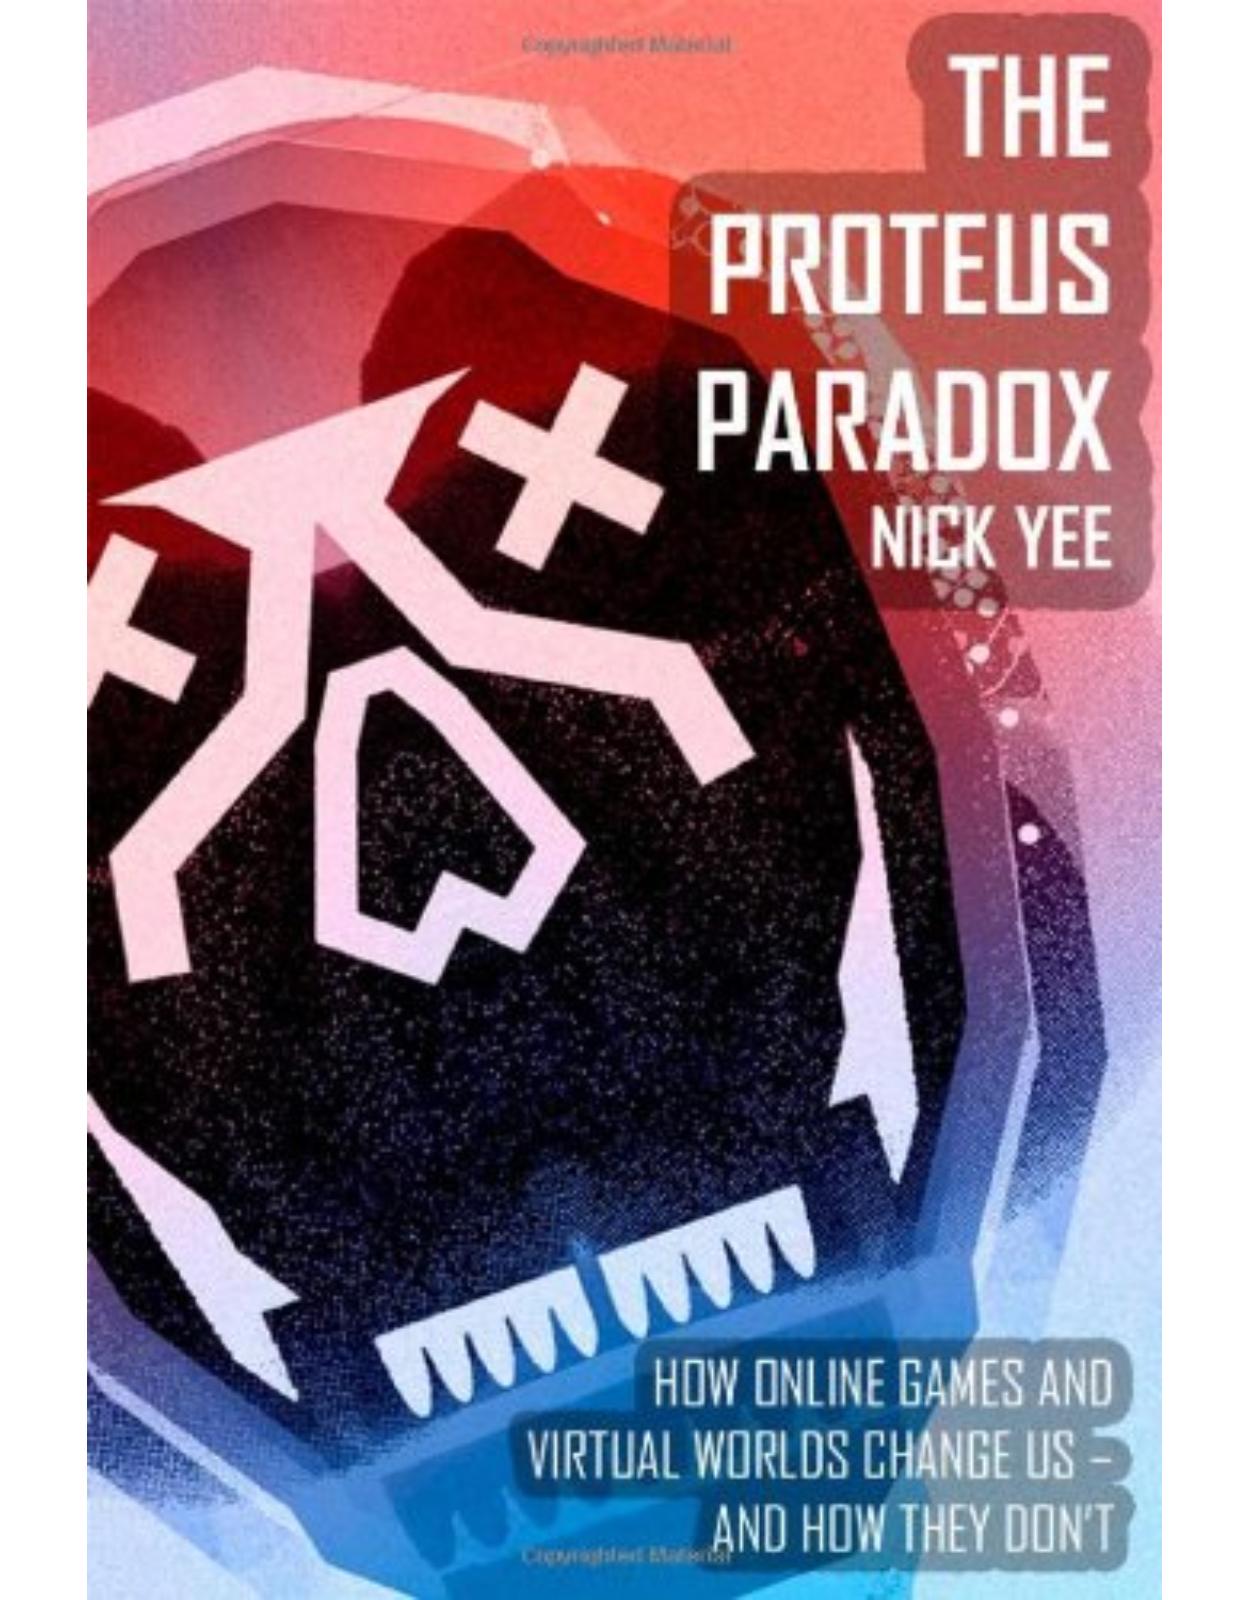 Proteus Paradox. How Online Games and Virtual Worlds Change Us - And How They Don't